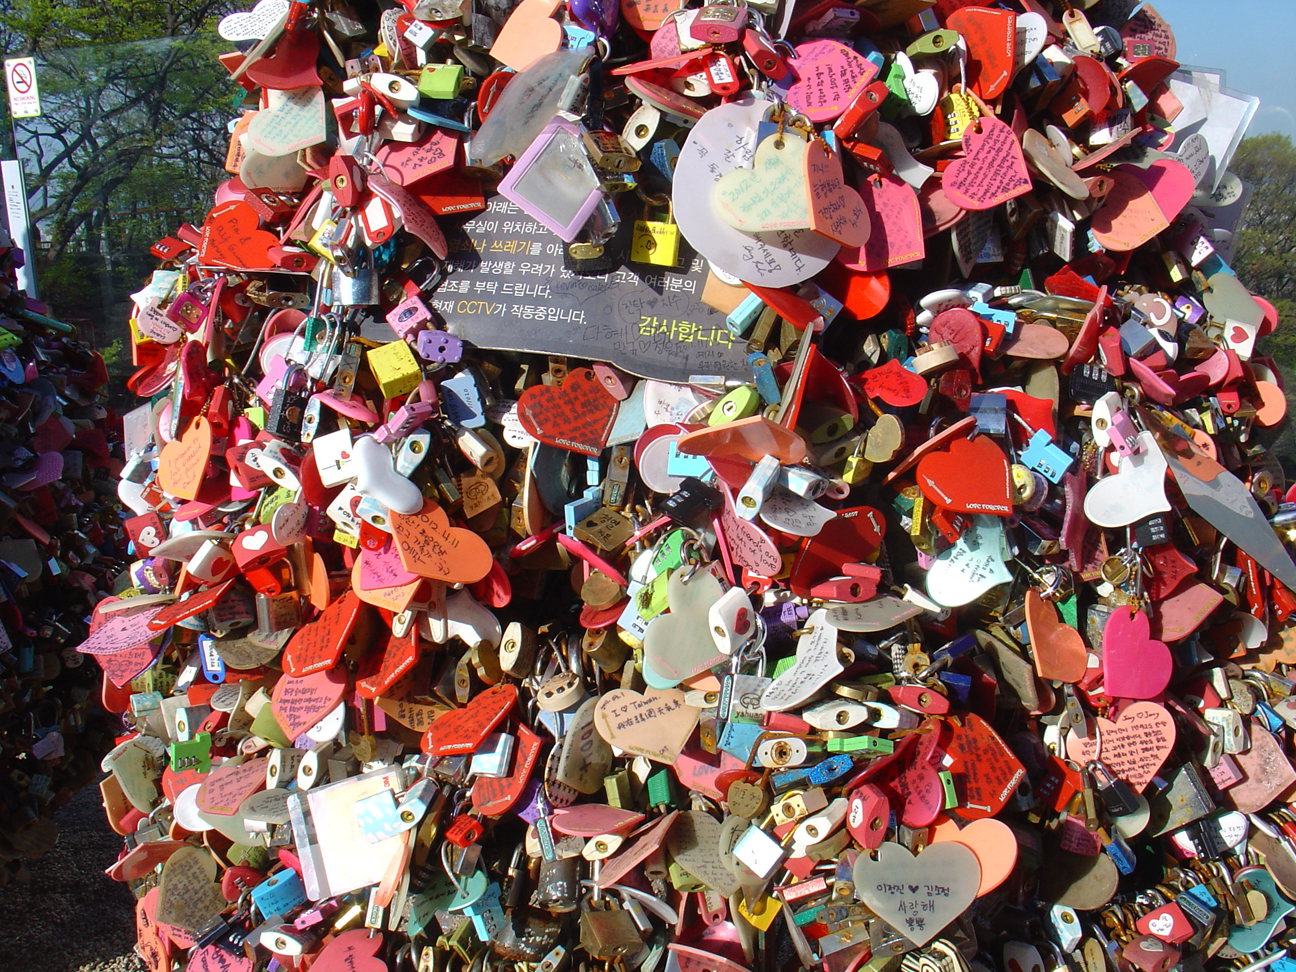 These locks are being attached by couples as symbol for eternal love.